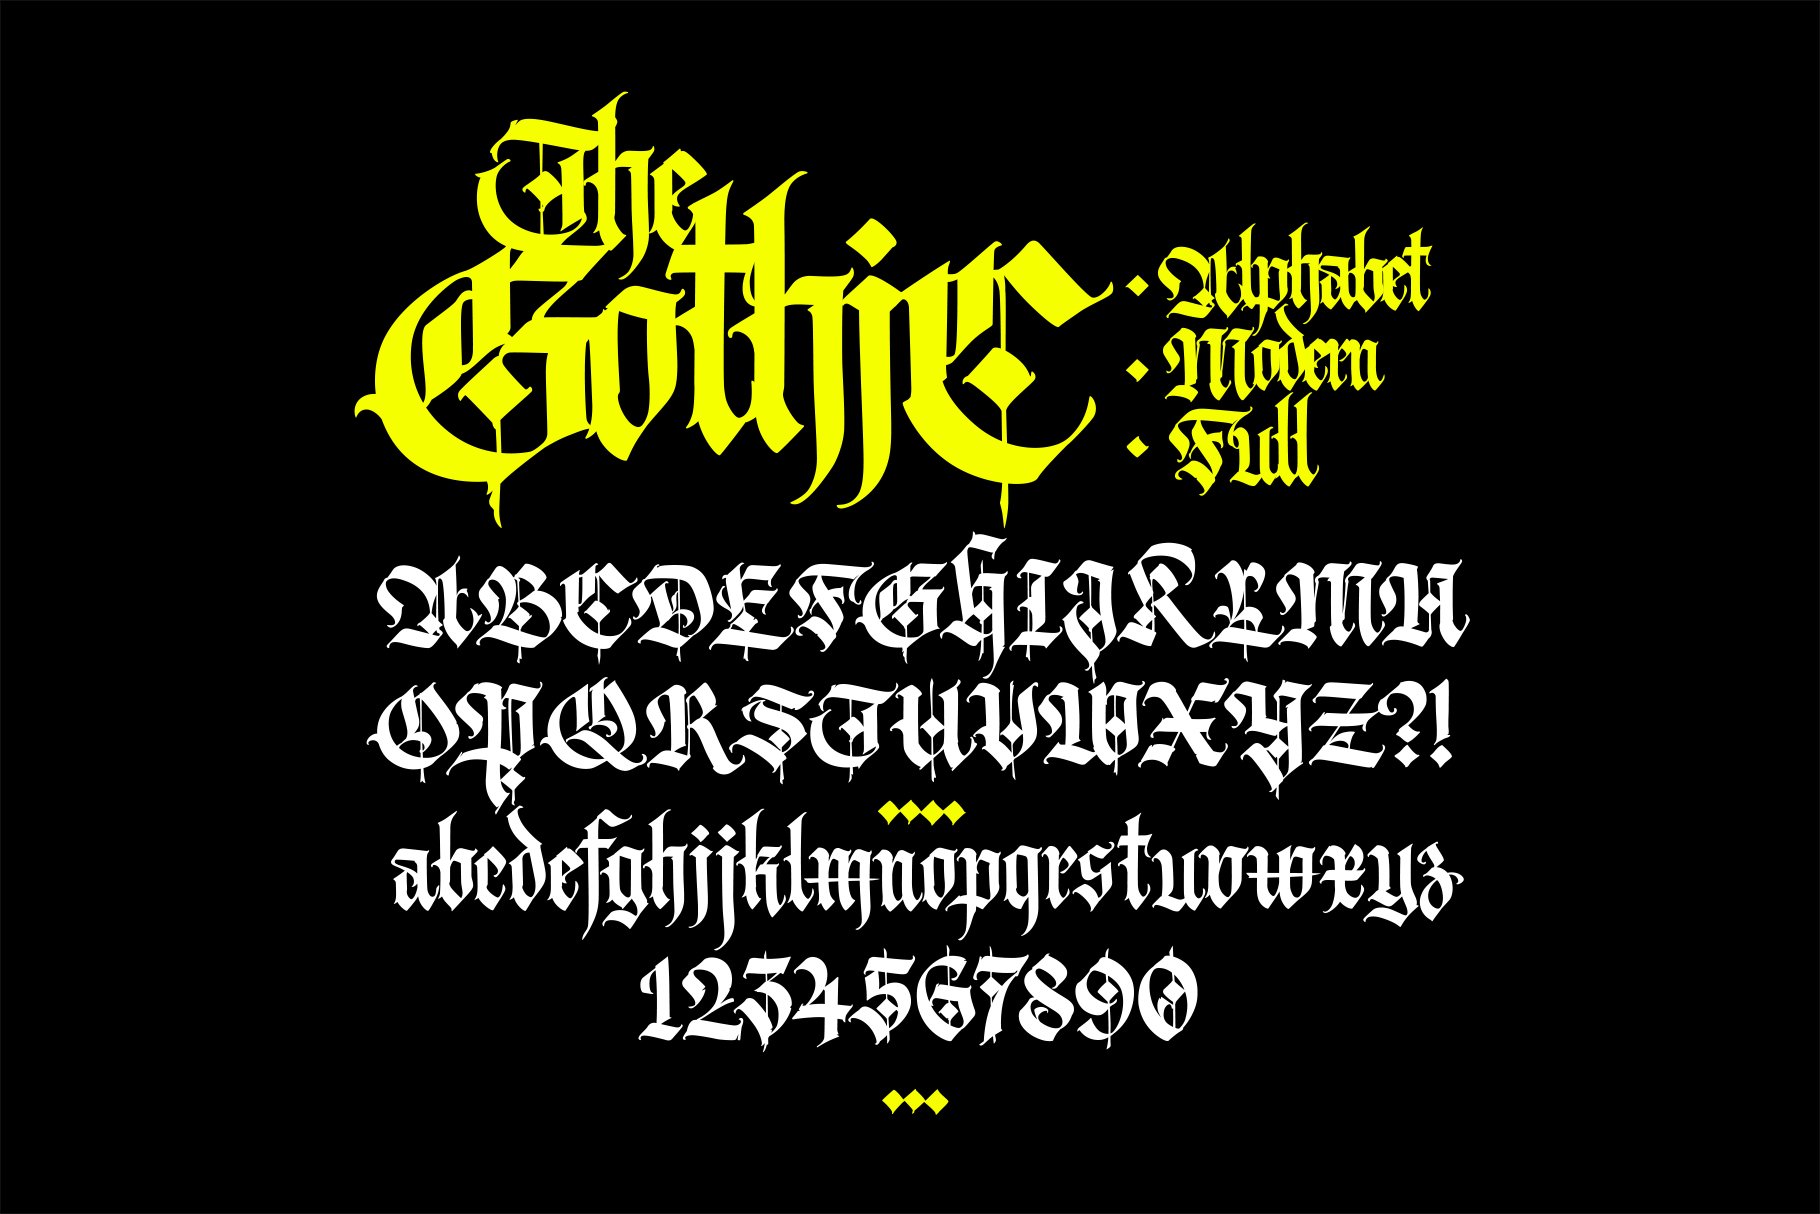 Gothic font 010 cover image.